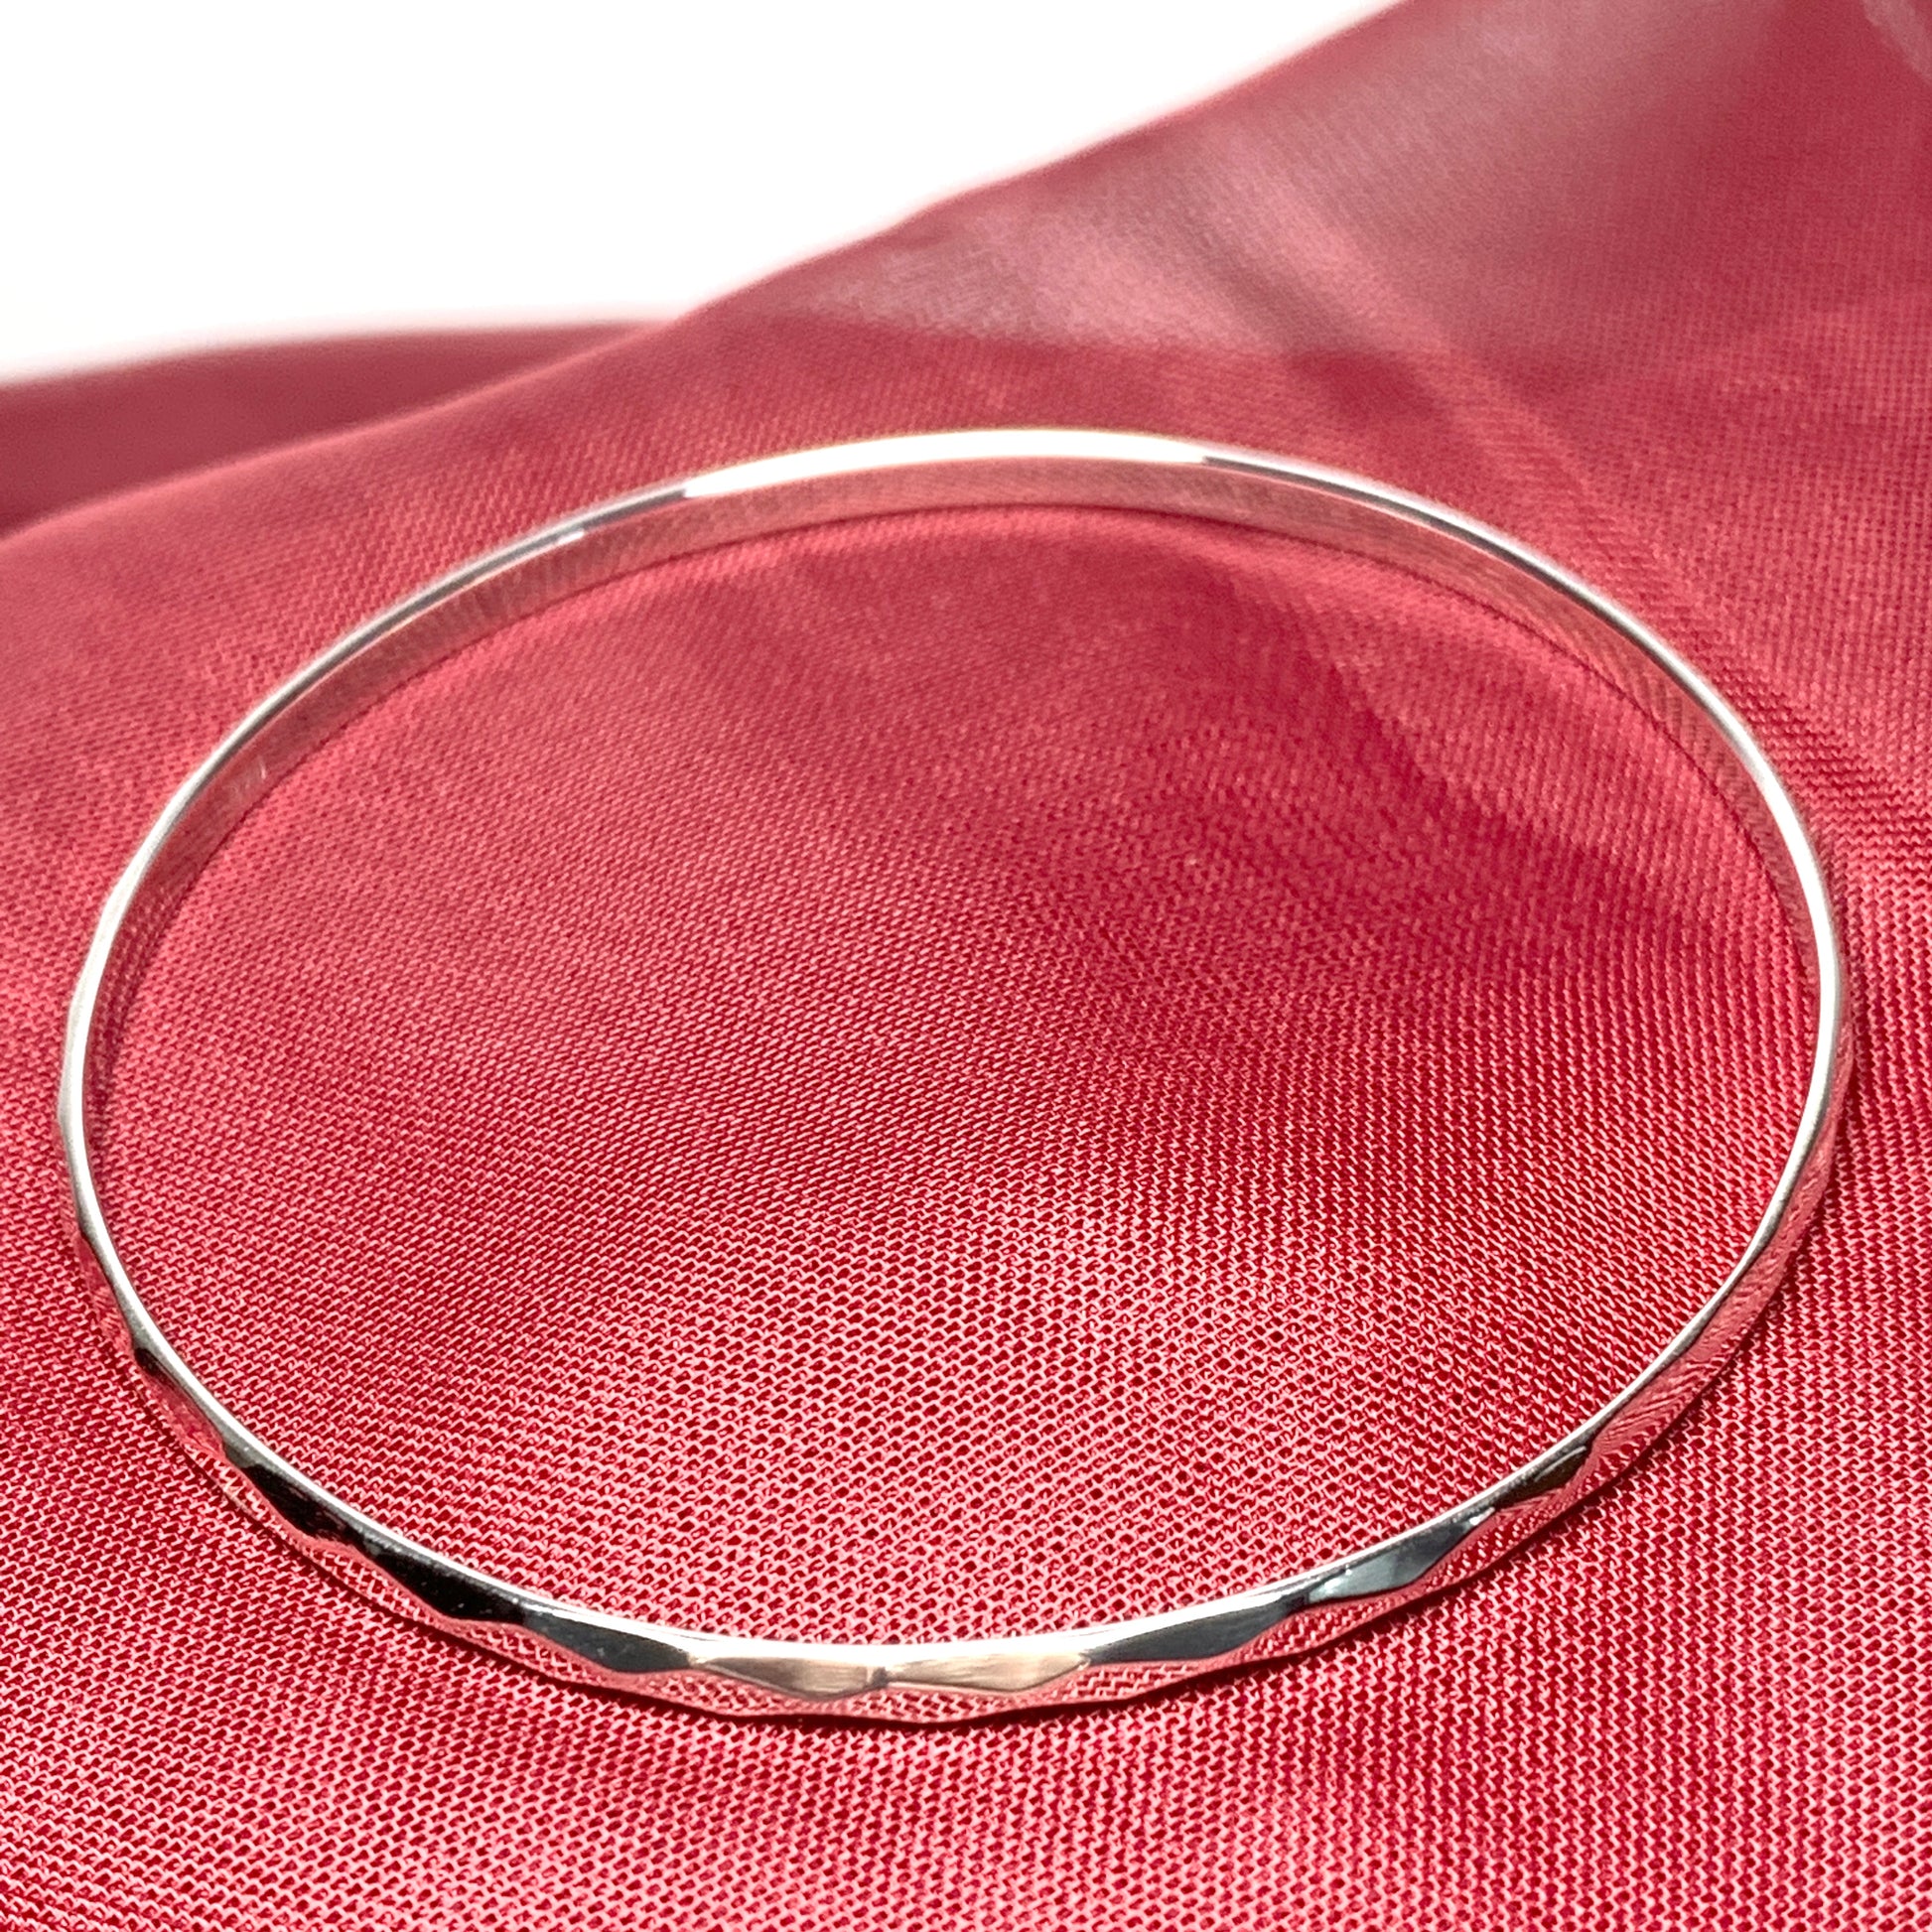 Solid round bangle 3 mm round patterned faceted sterling silver slave